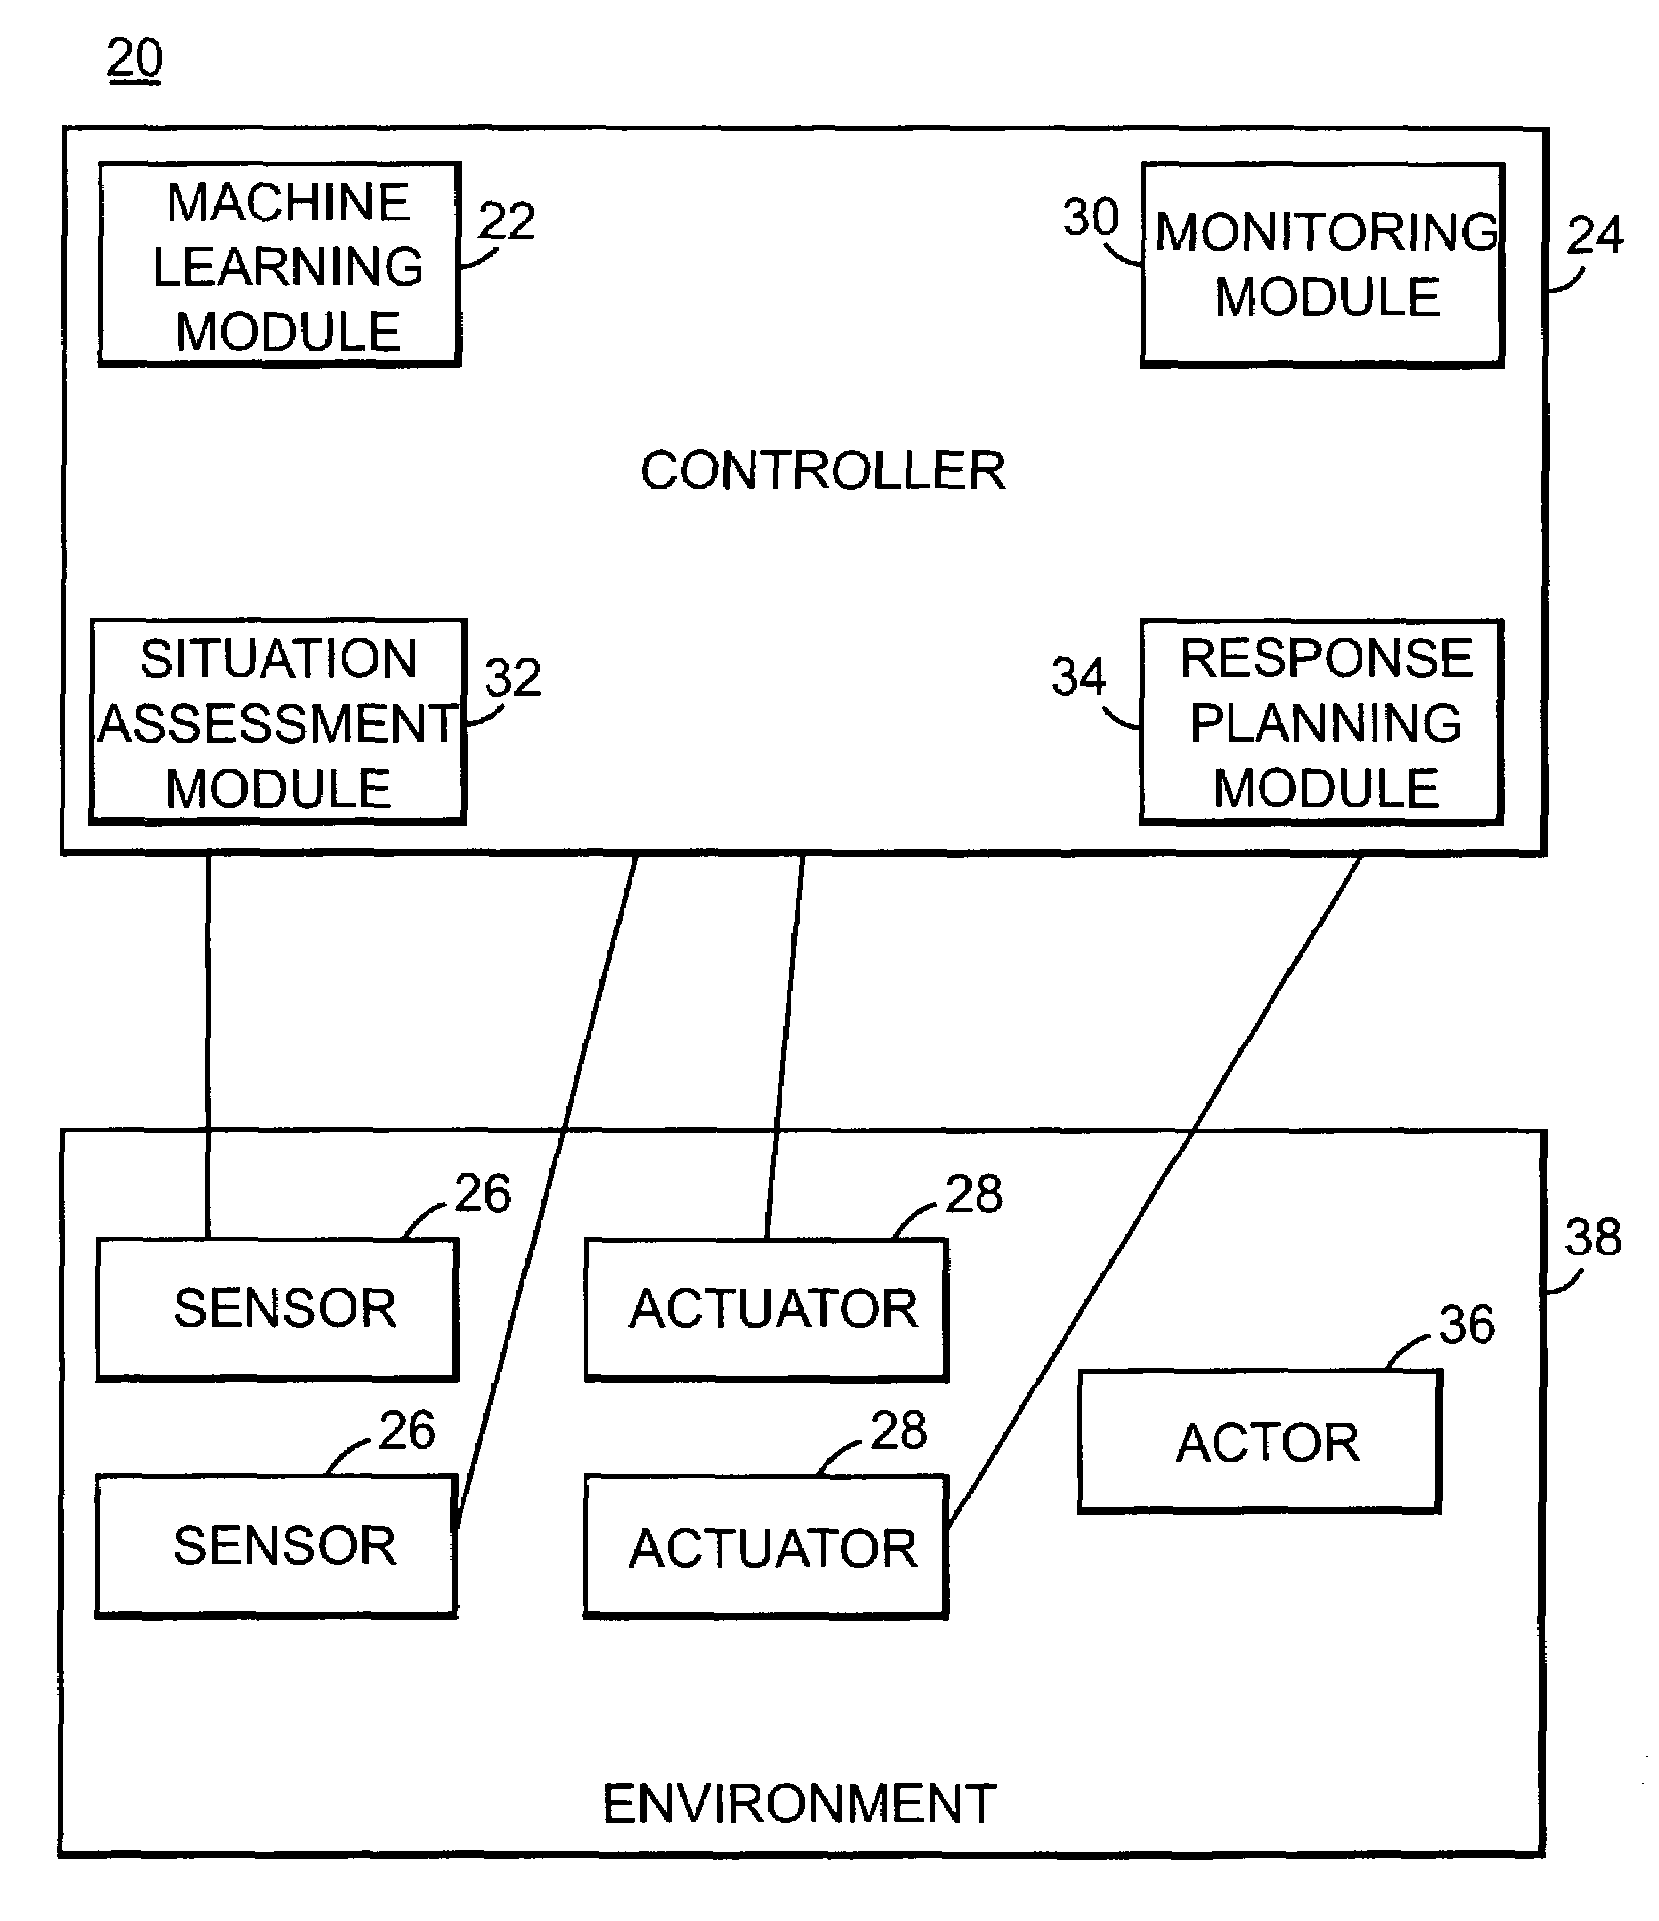 System and method for learning patterns of behavior and operating a monitoring and response system based thereon